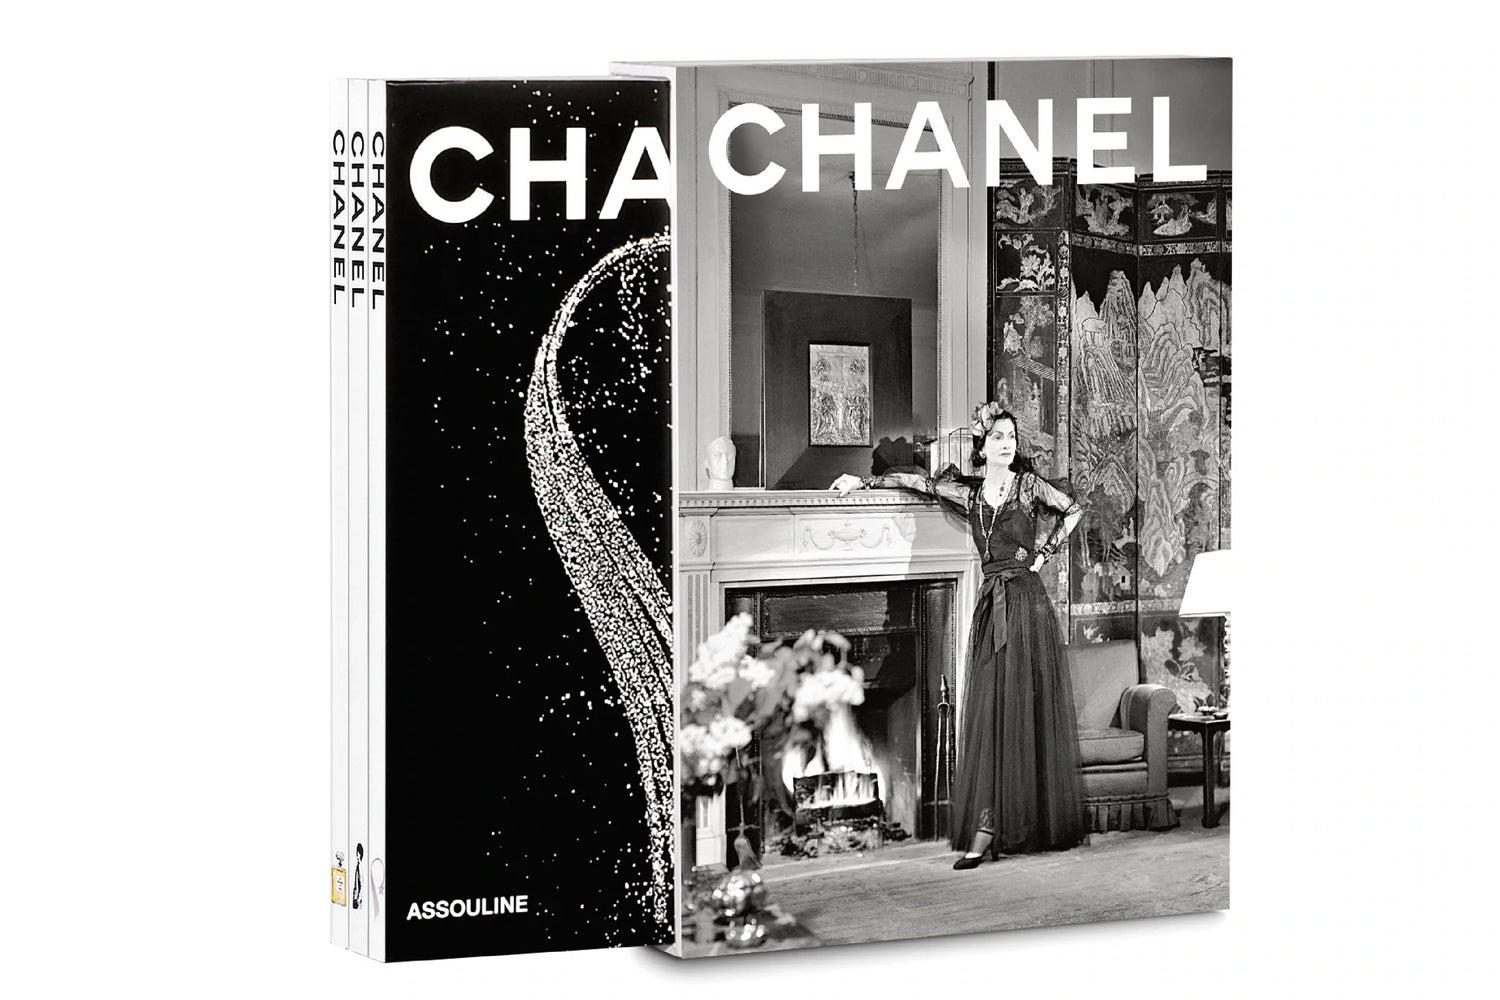 June Book Chain: The World of Fashion- Starting with Chanel